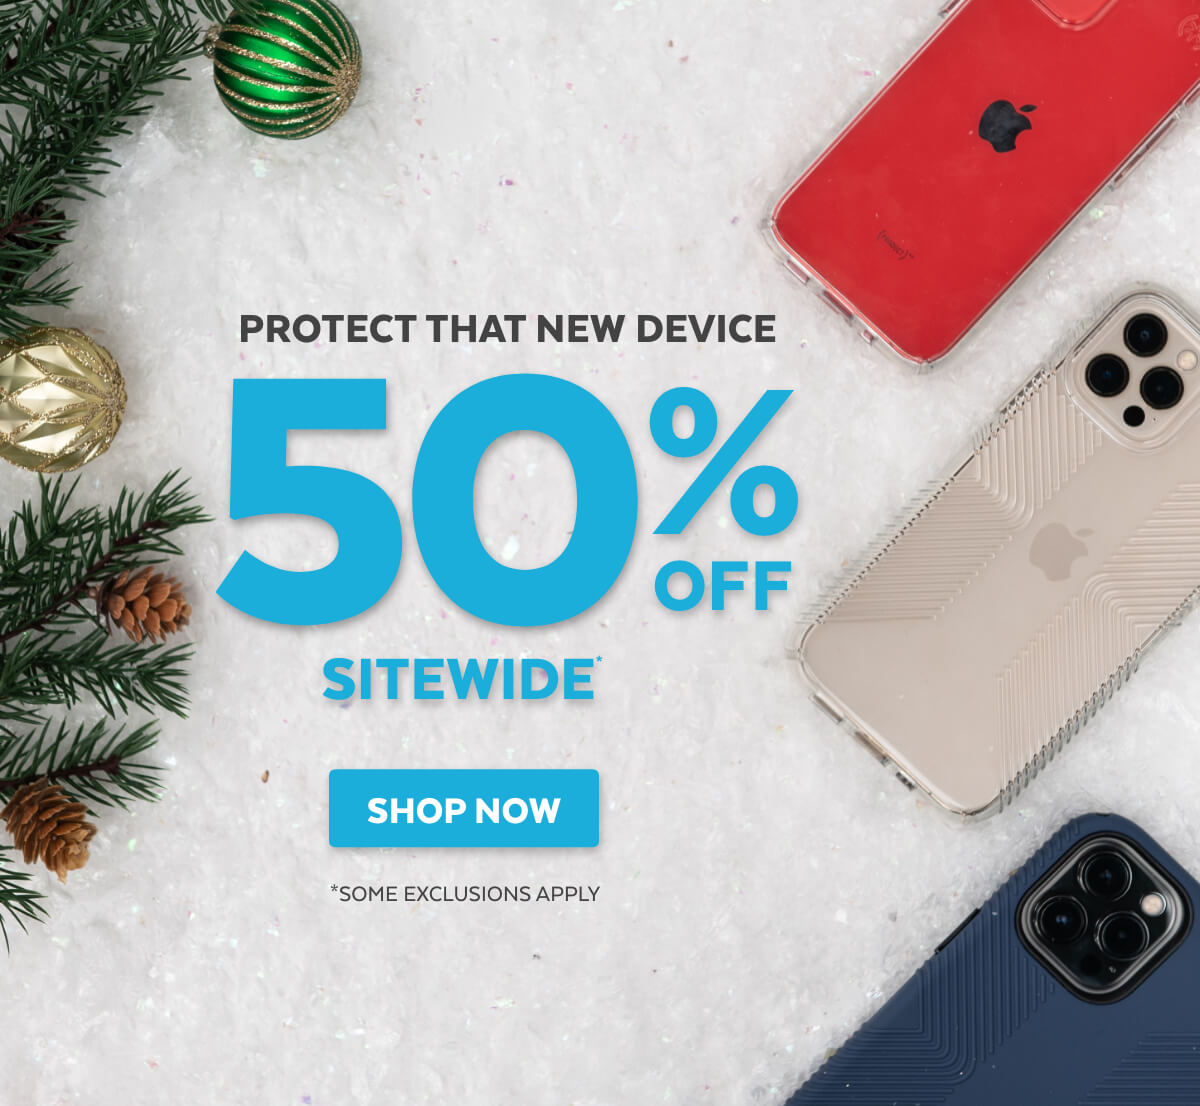 Protect that new device. 50% off sitewide. Shop now.